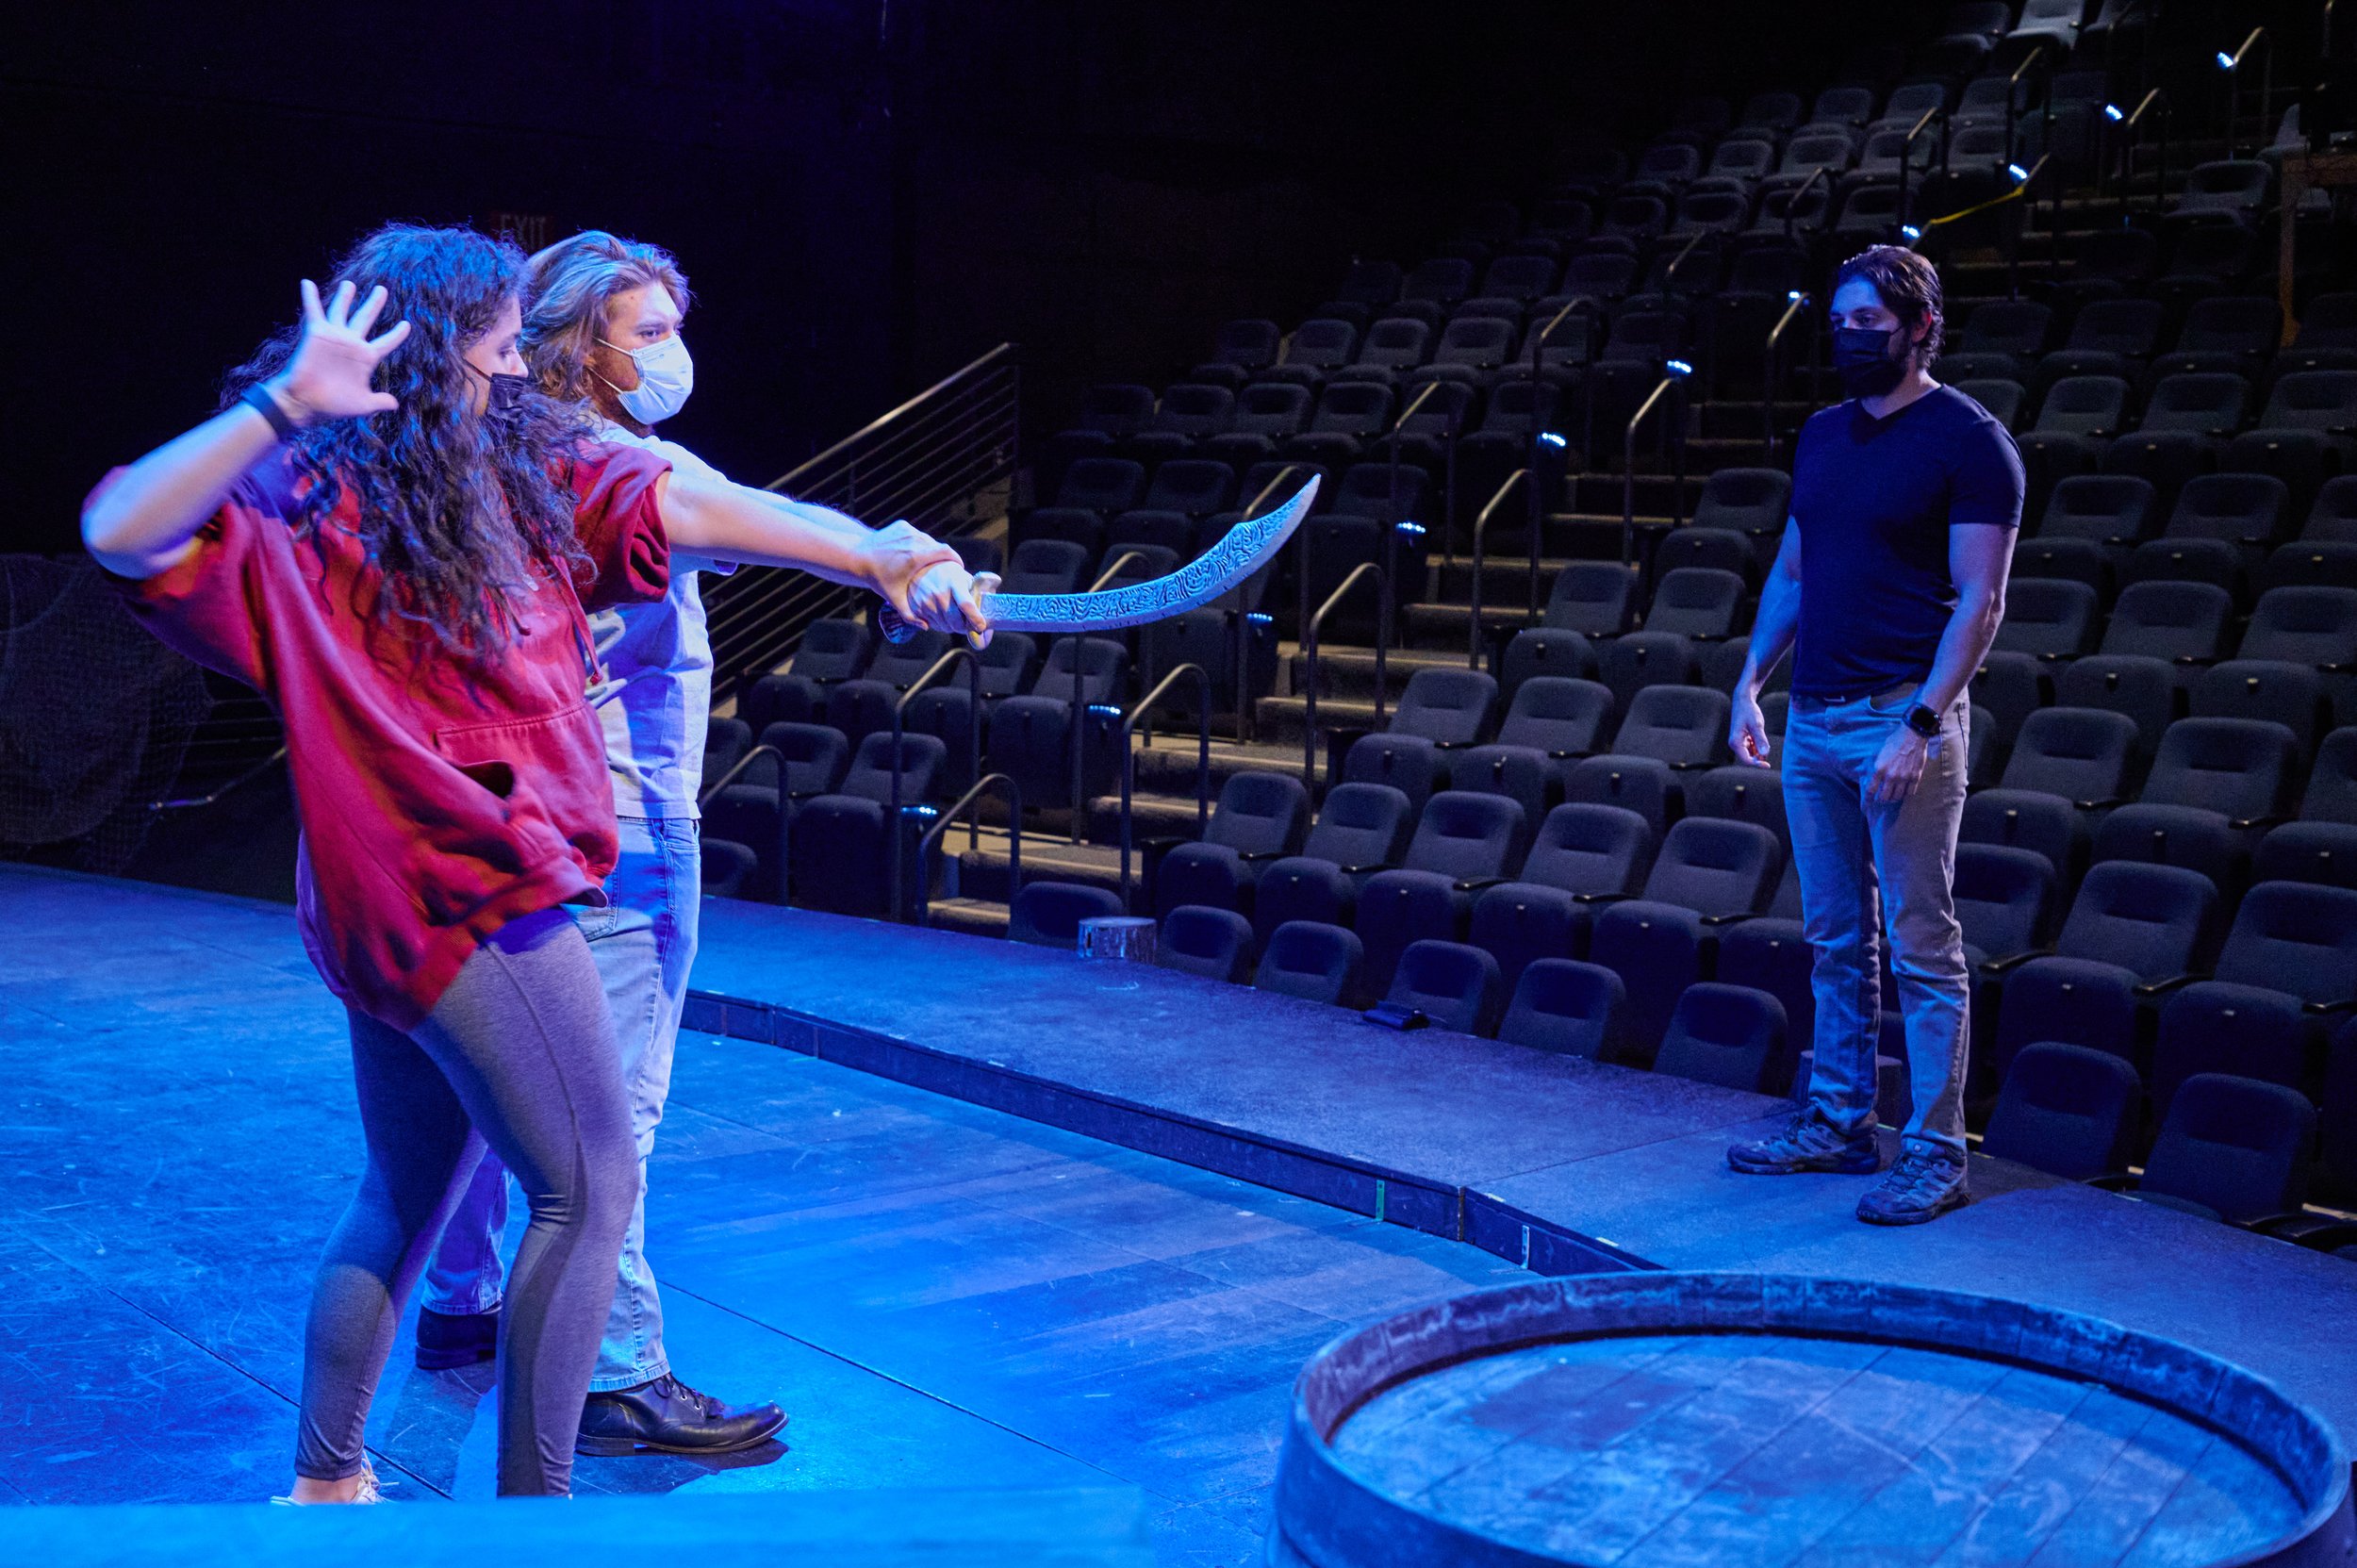  Fight Choreographer Ryan Dylan Wargnier (right) works with Savannah Haislip (left) and Justin Valine (center) during rehearsal of the Santa Monica College Theatre Arts production of "Treasure Island" at the SMC Main Stage on Thursday, May 12, 2022, 